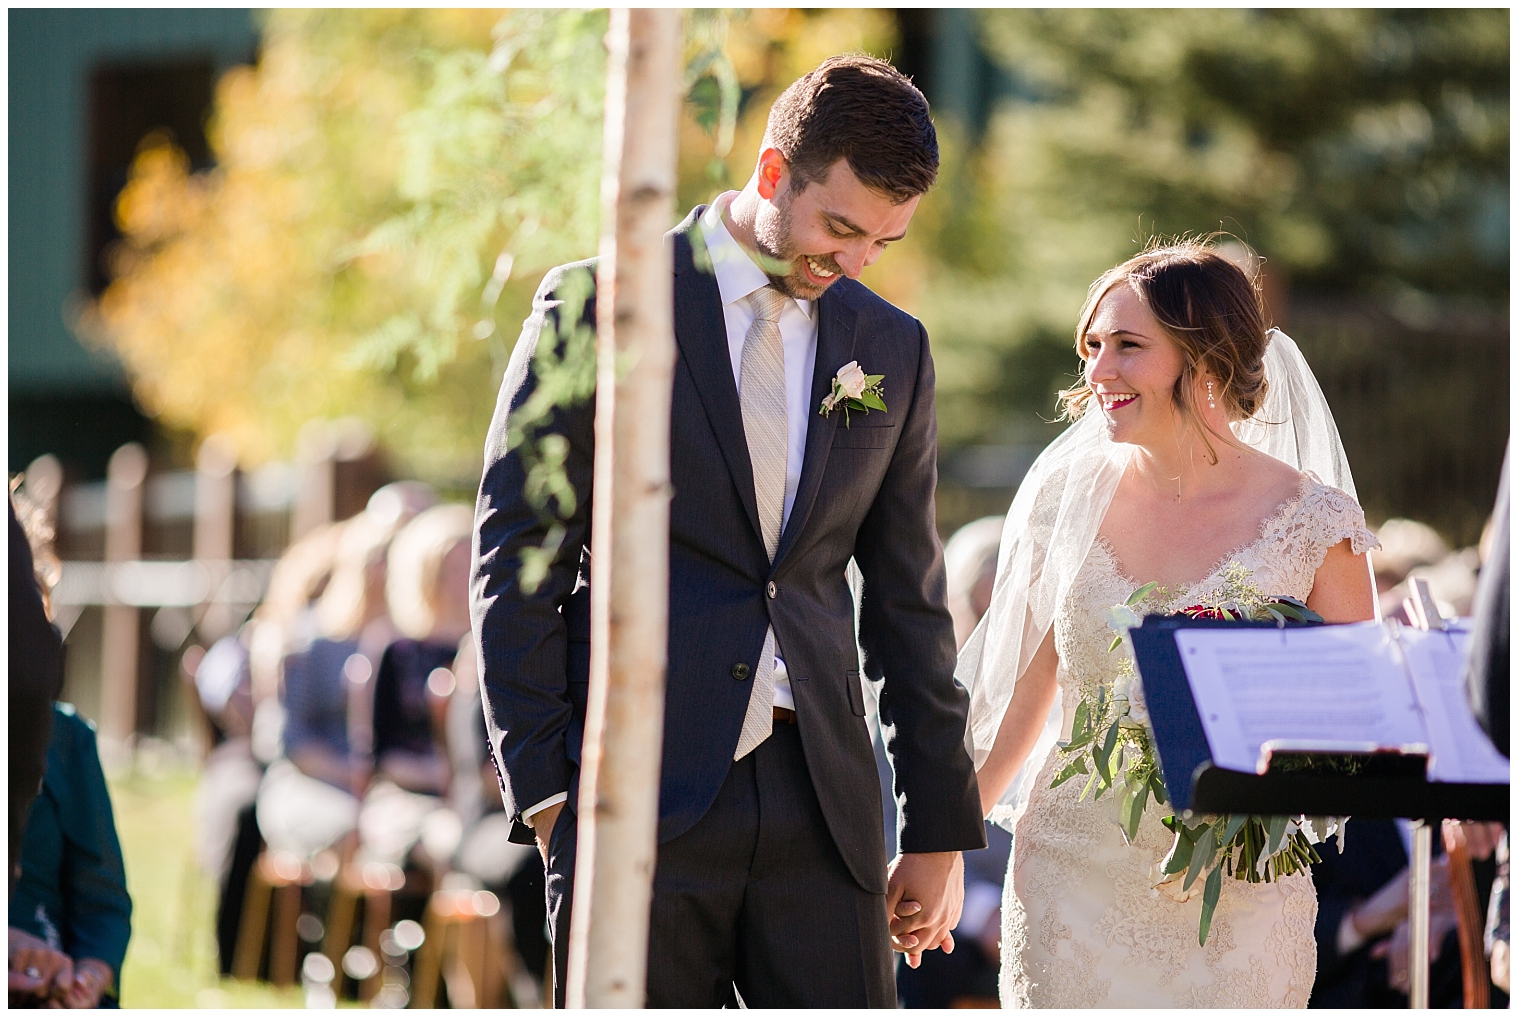 The wedding couple hold hands and laugh together during their Copper Mountain wedding ceremony.